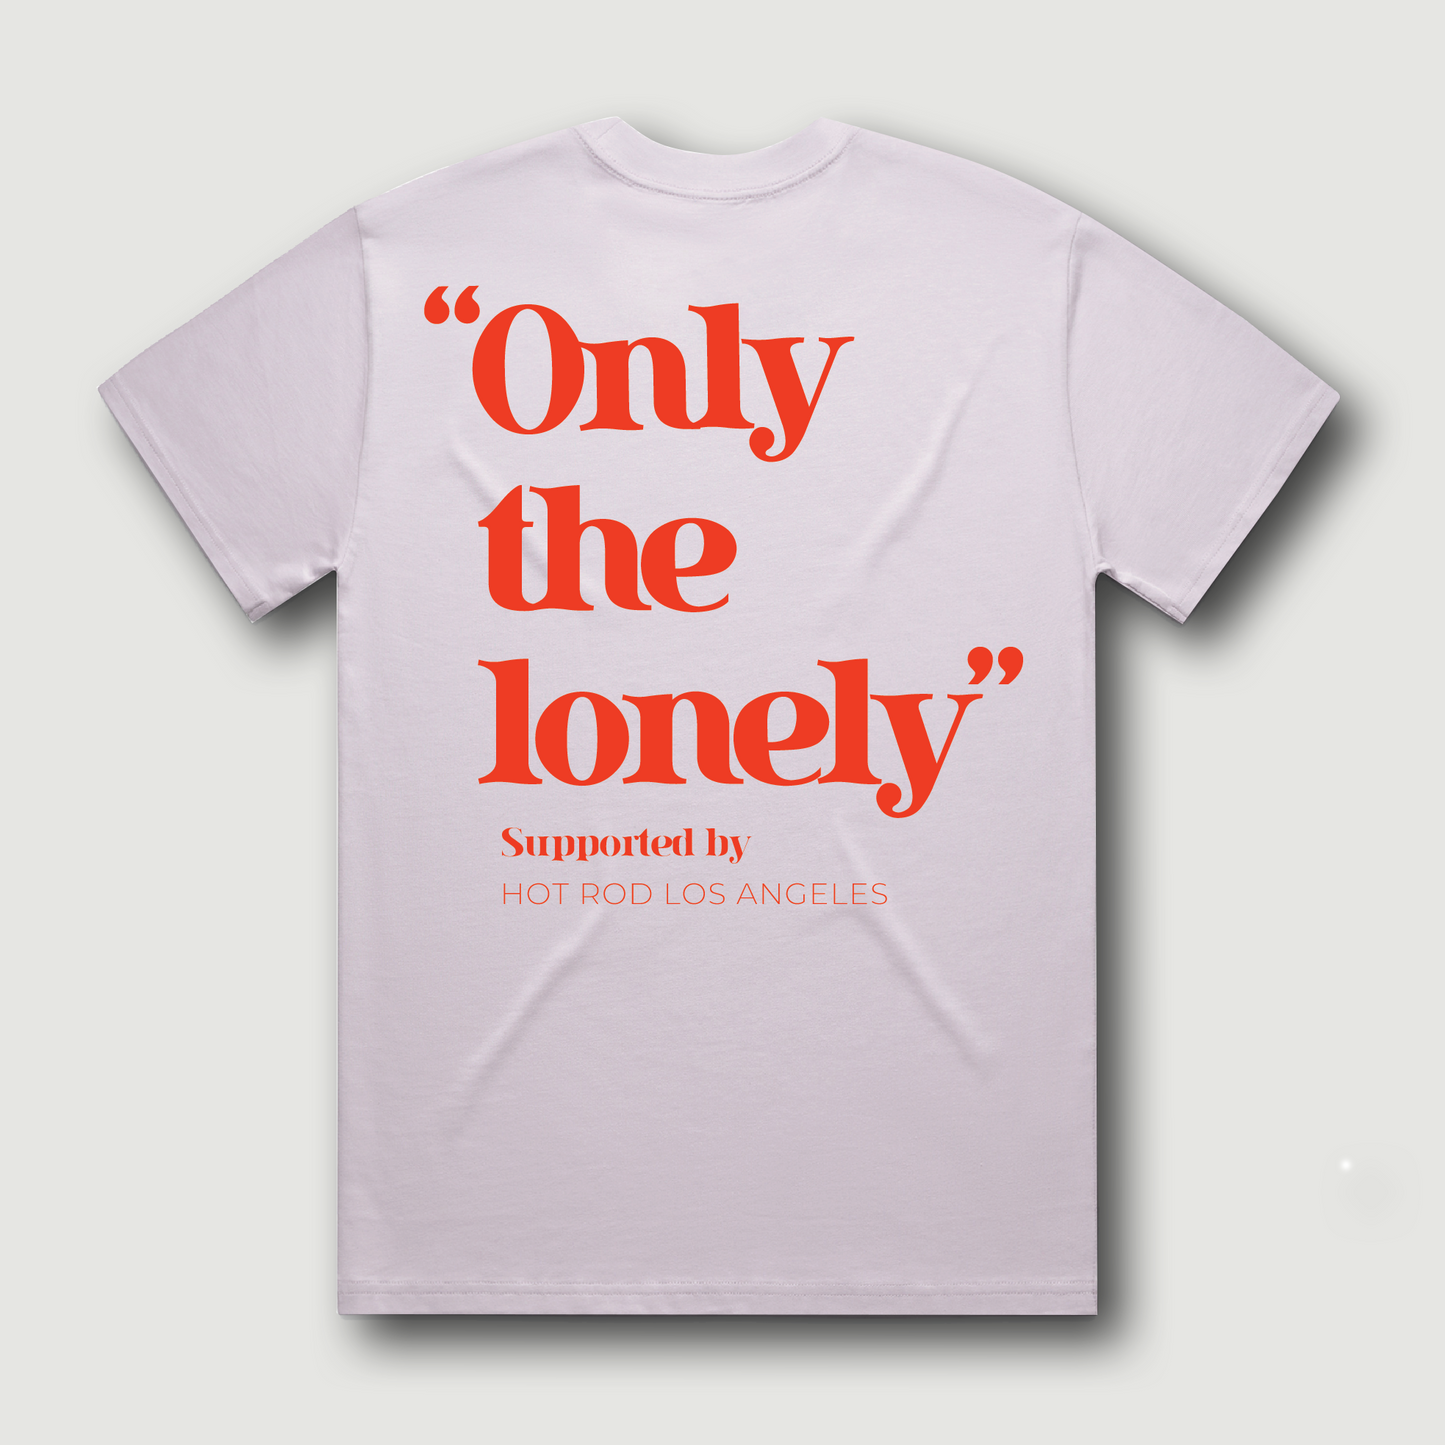 ONLY THE LONELY LOGO SHORT SLEEVE T-SHIRT (ORCHARD/FIRE RED)